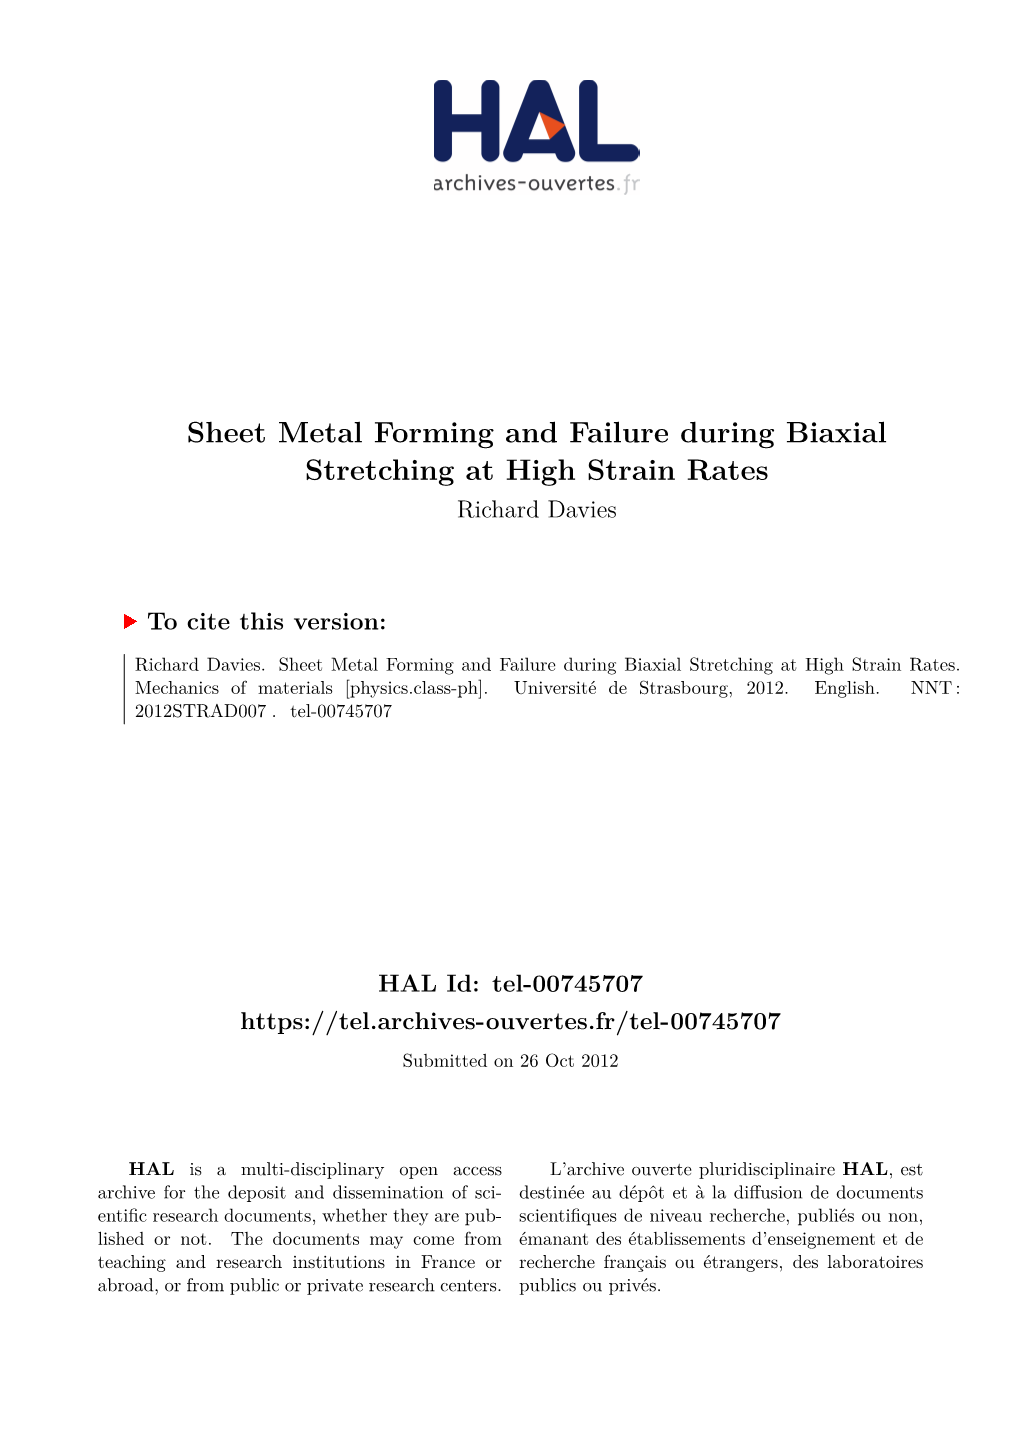 Sheet Metal Forming and Failure During Biaxial Stretching at High Strain Rates Richard Davies